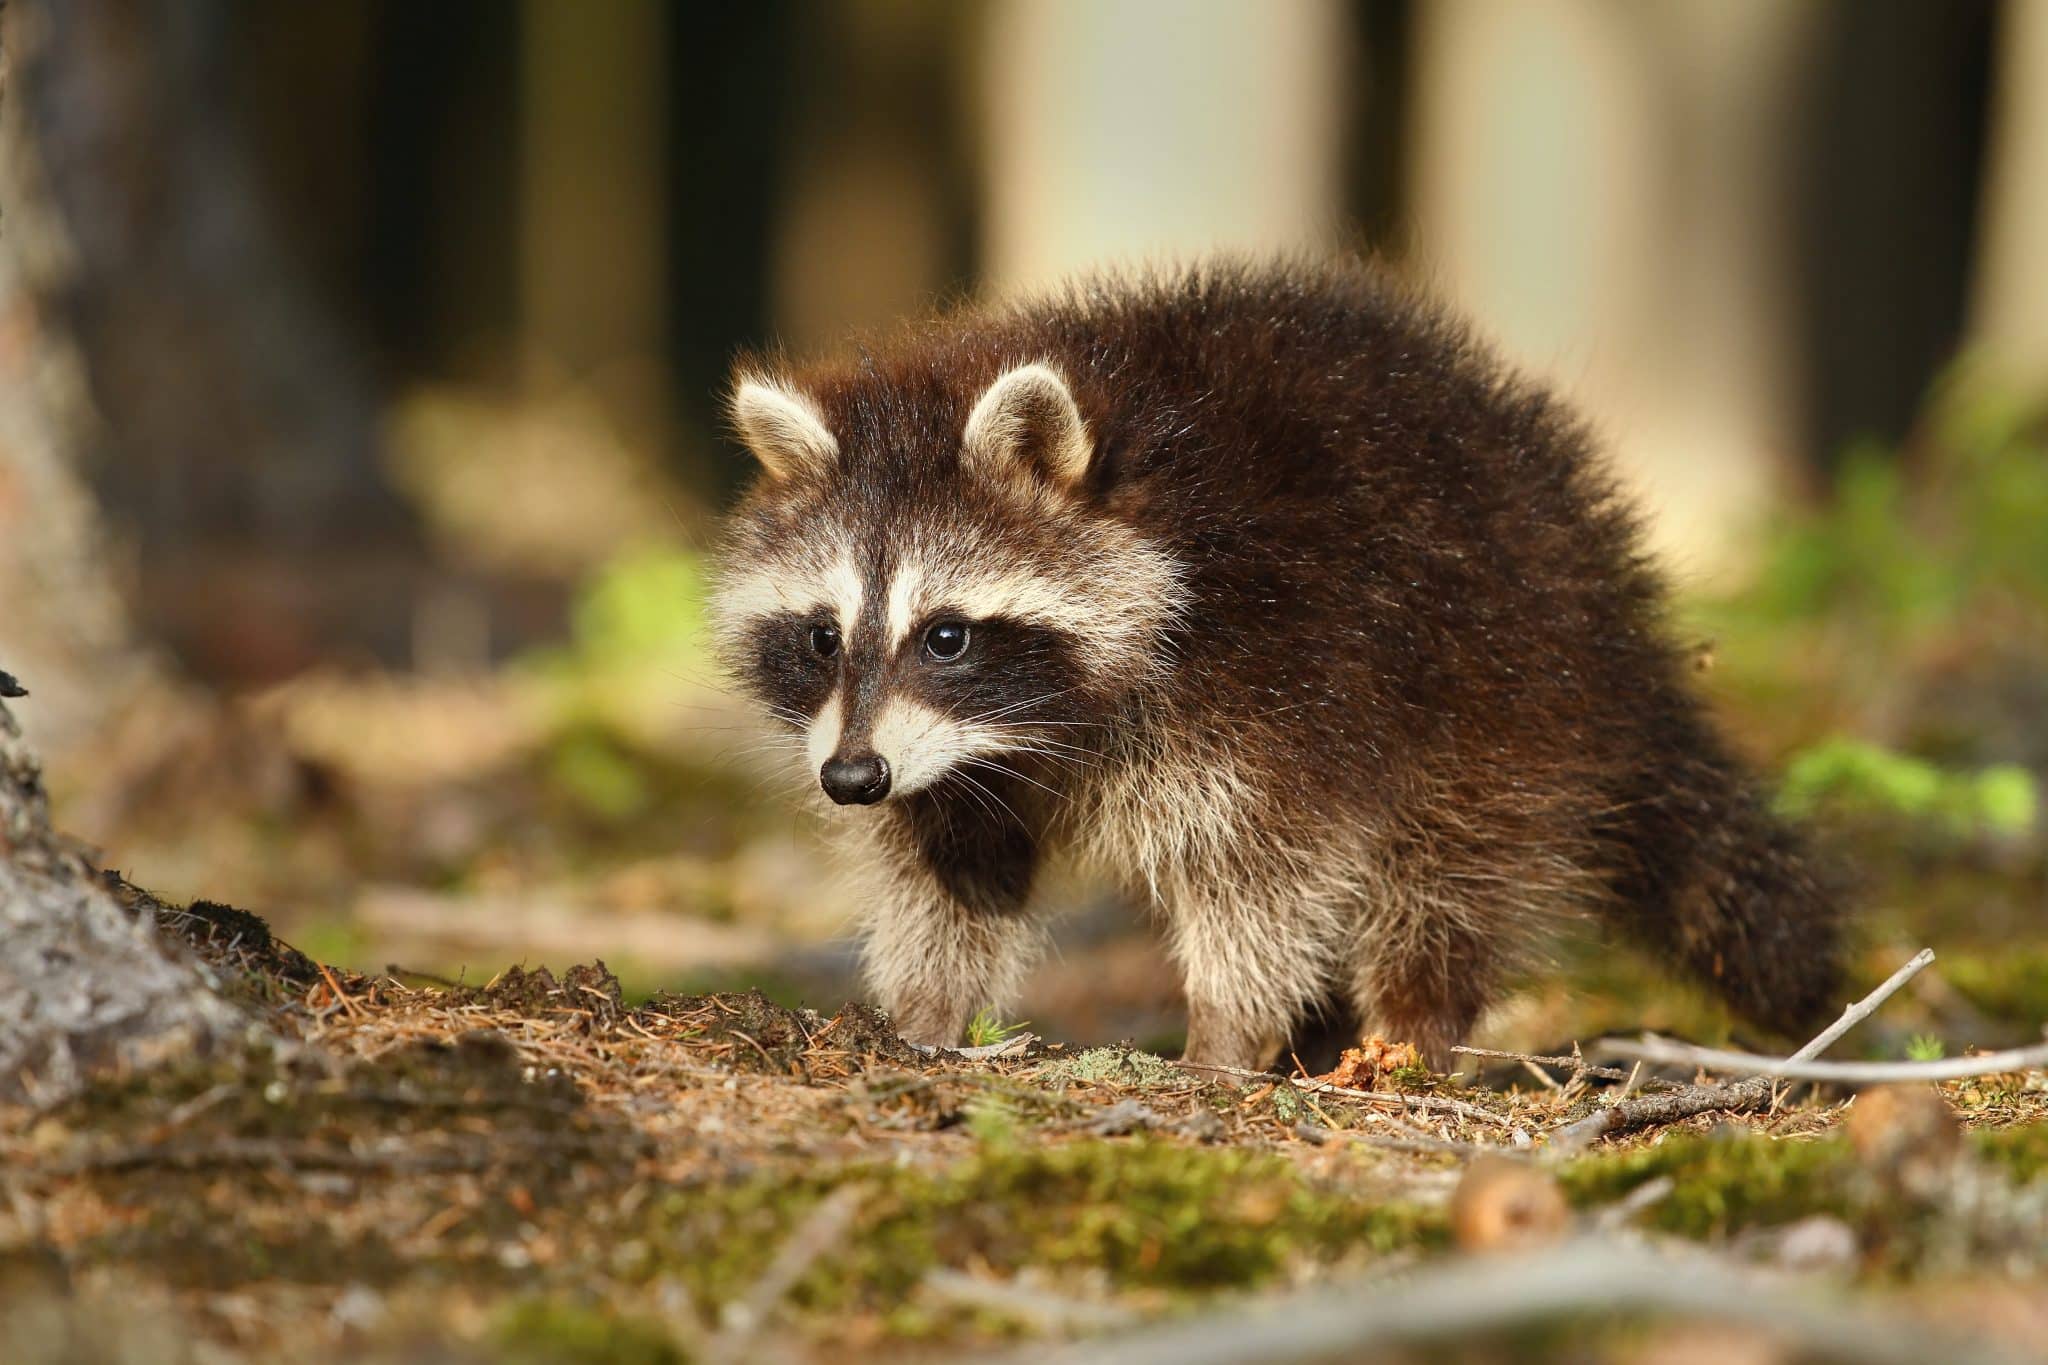 How To Get Rid of Raccoons Fast and Permanently